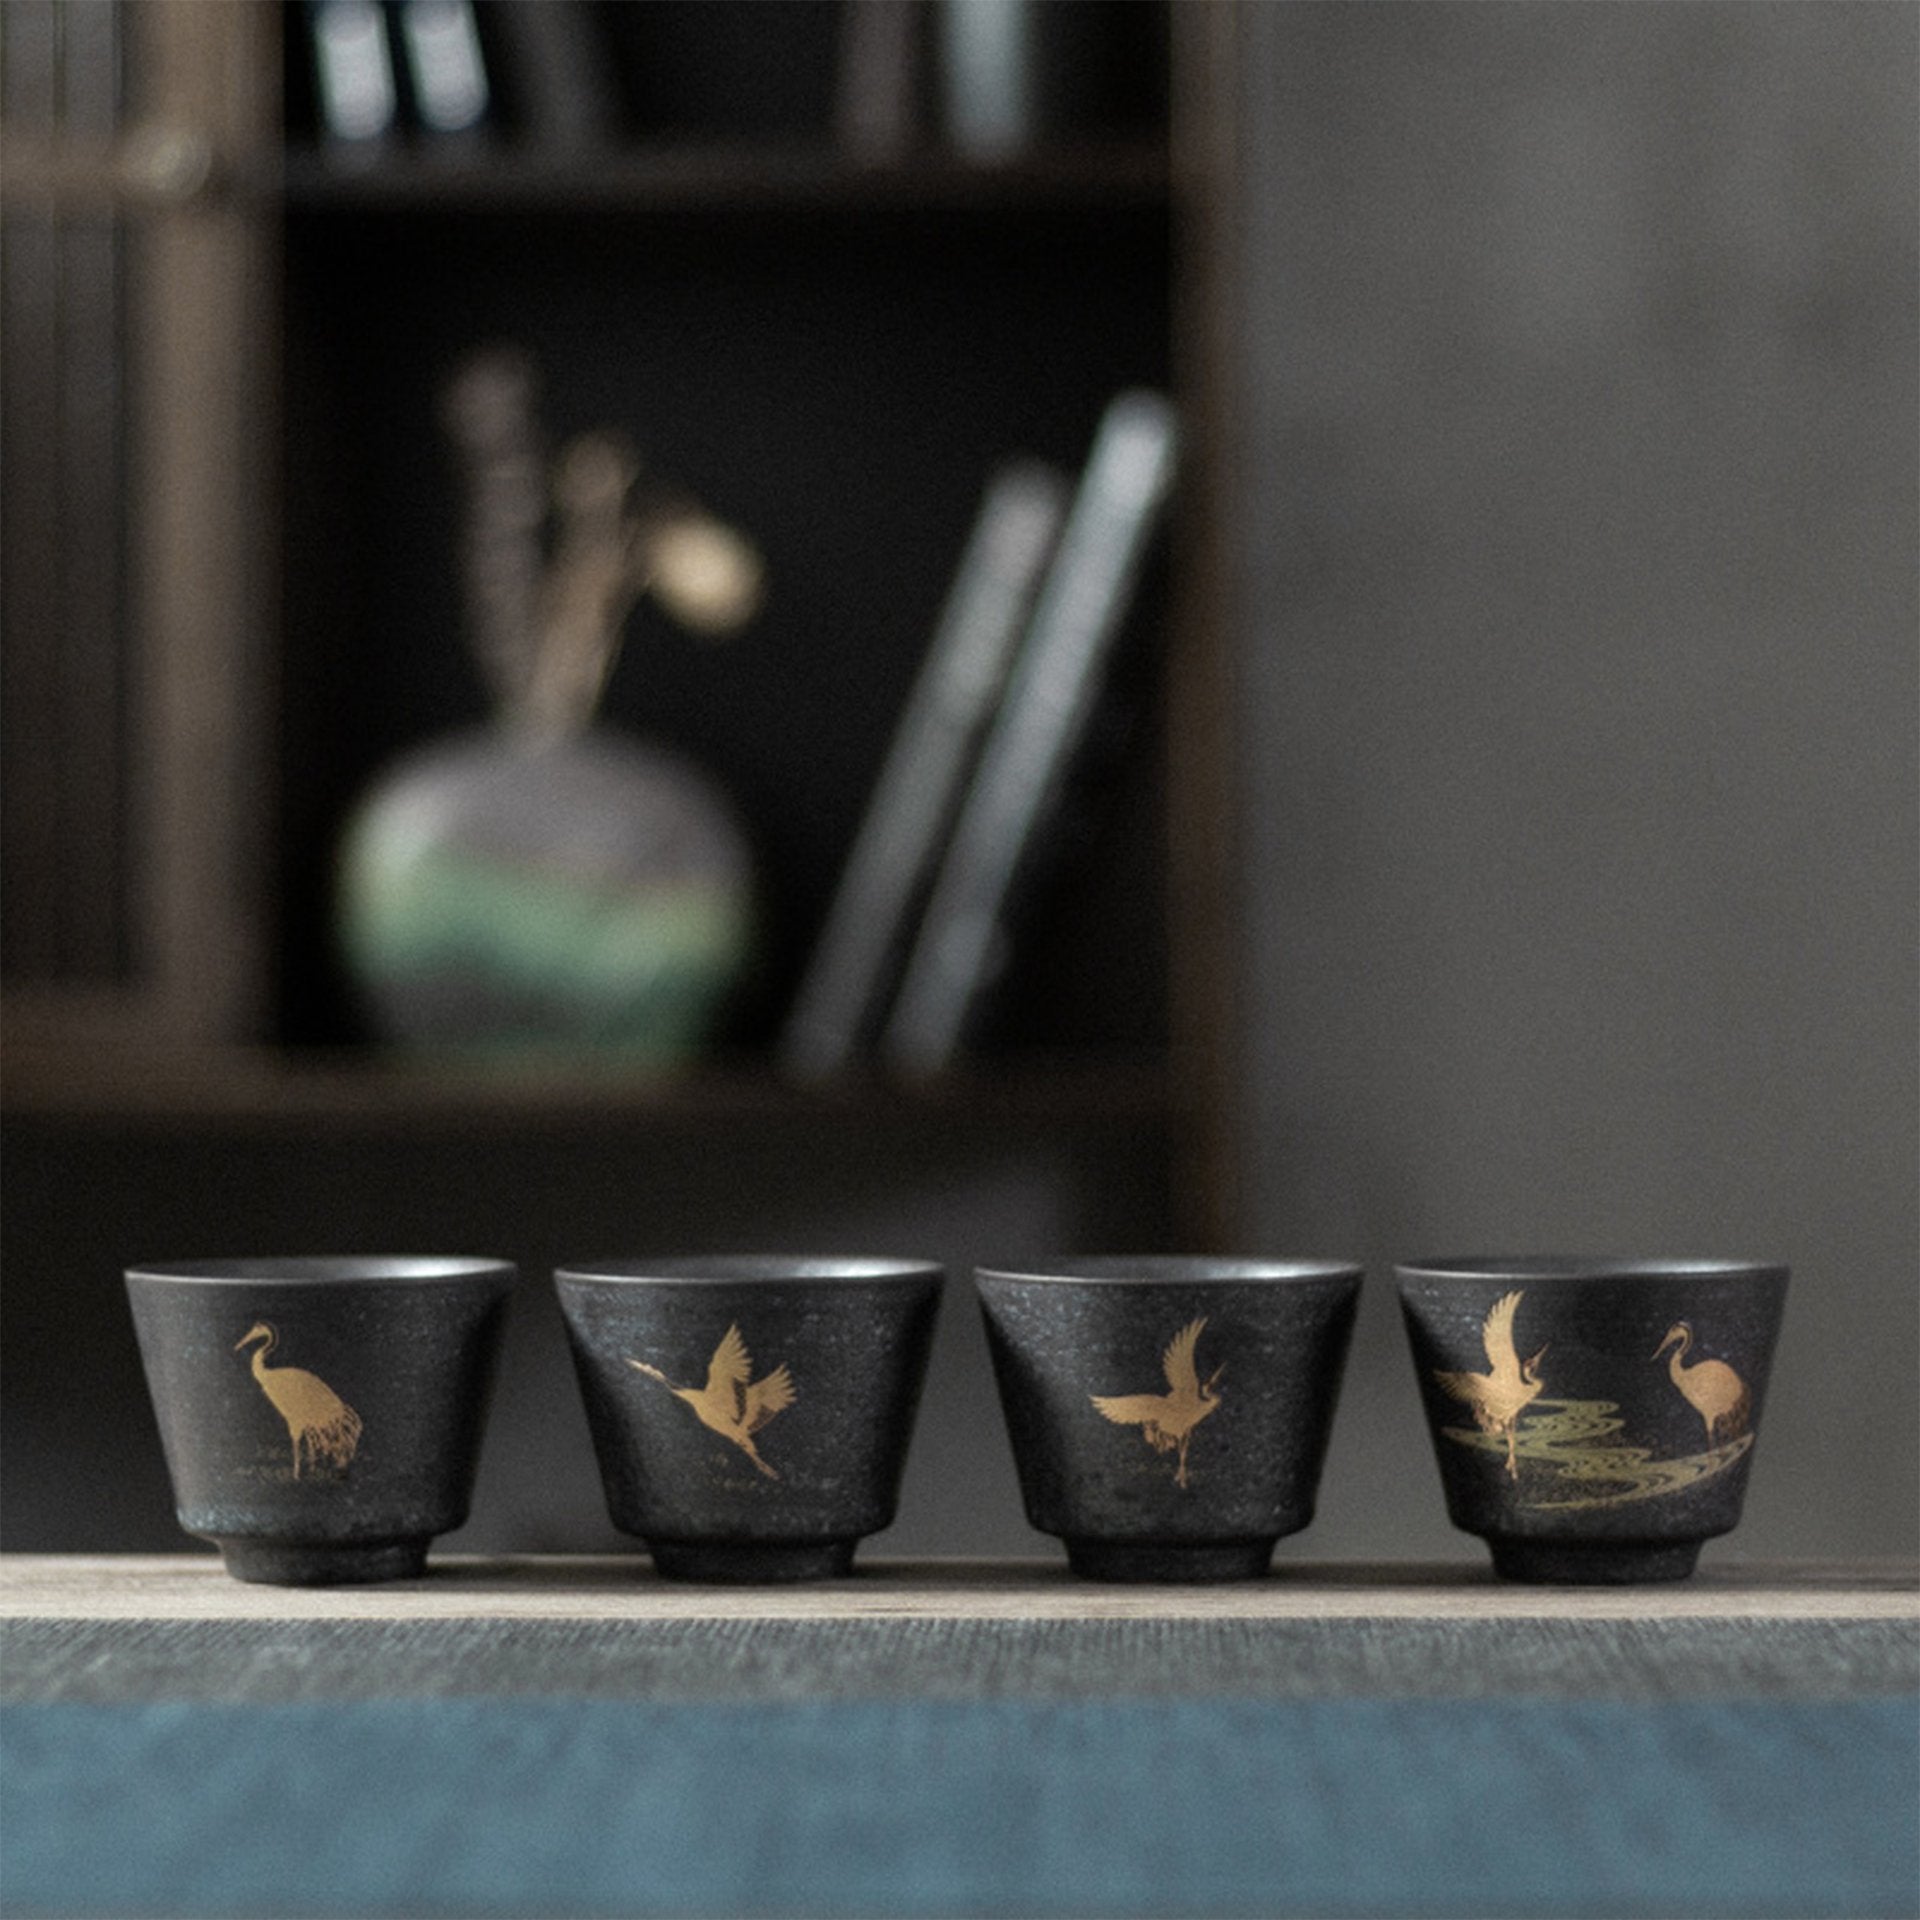 Four dark teacups with golden crane designs displayed on a blue cloth with a blurred bookshelf in the background